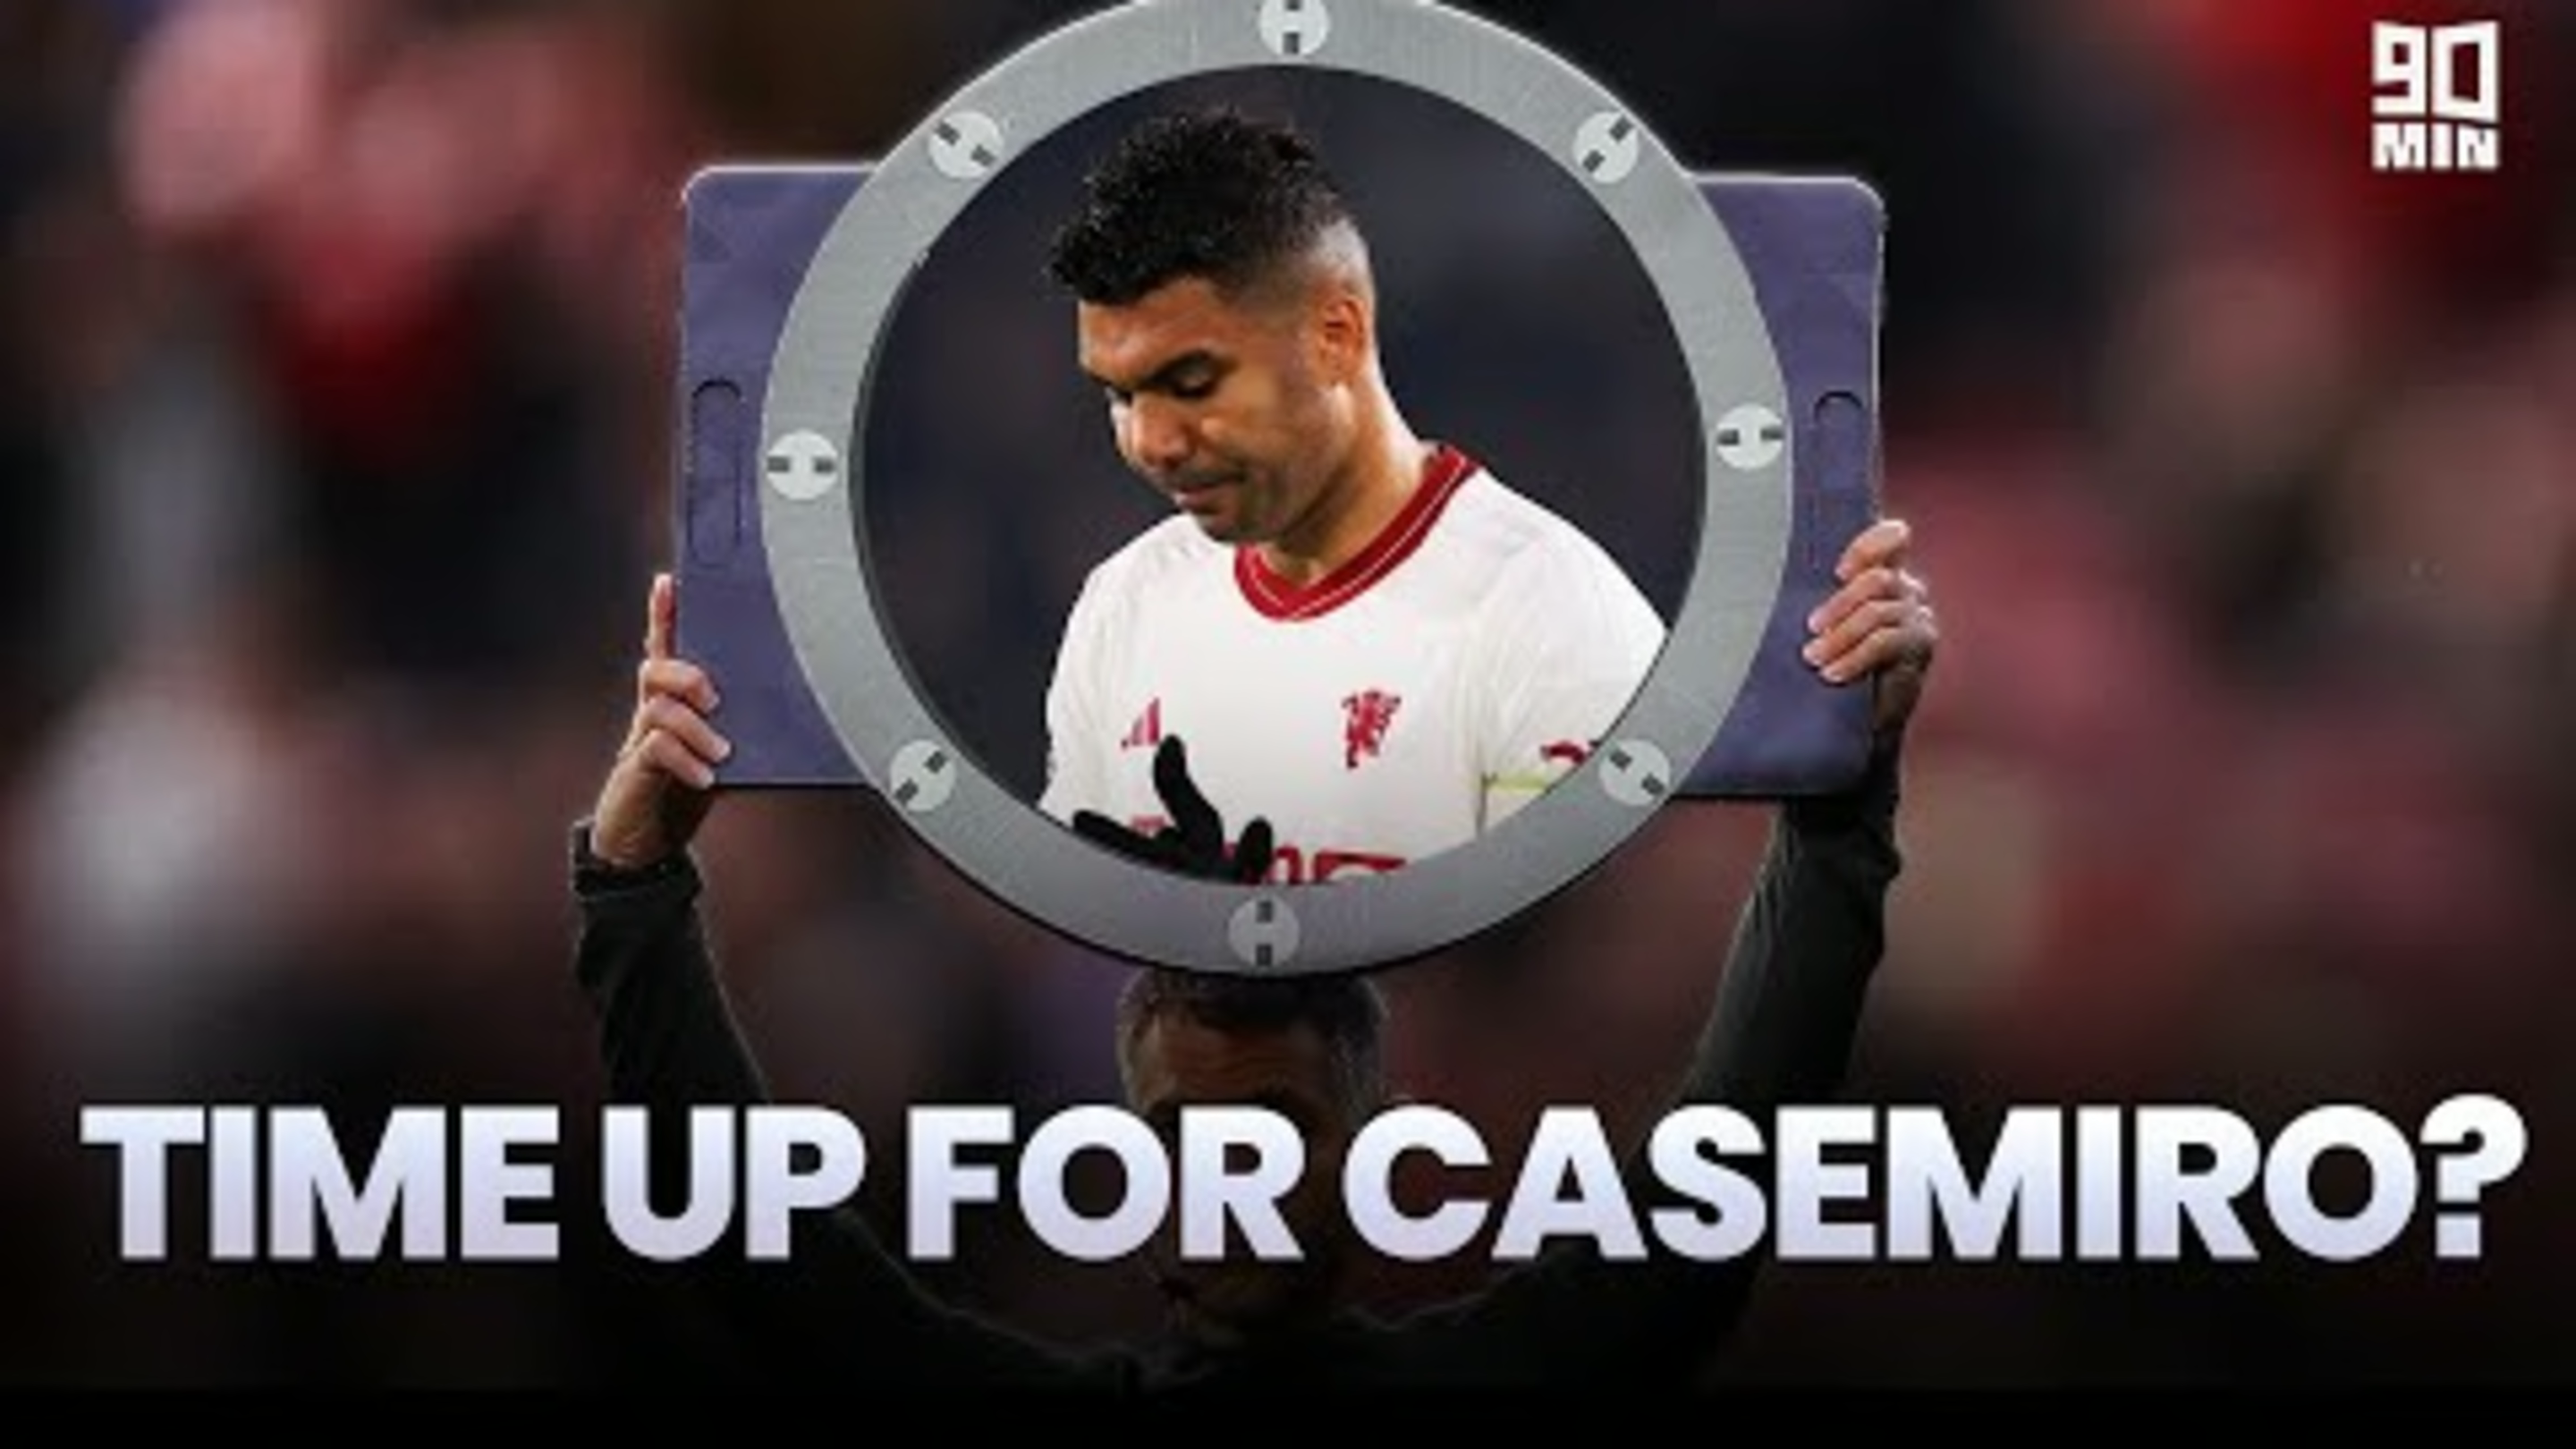 Is it time up for Casemiro at Man Utd?